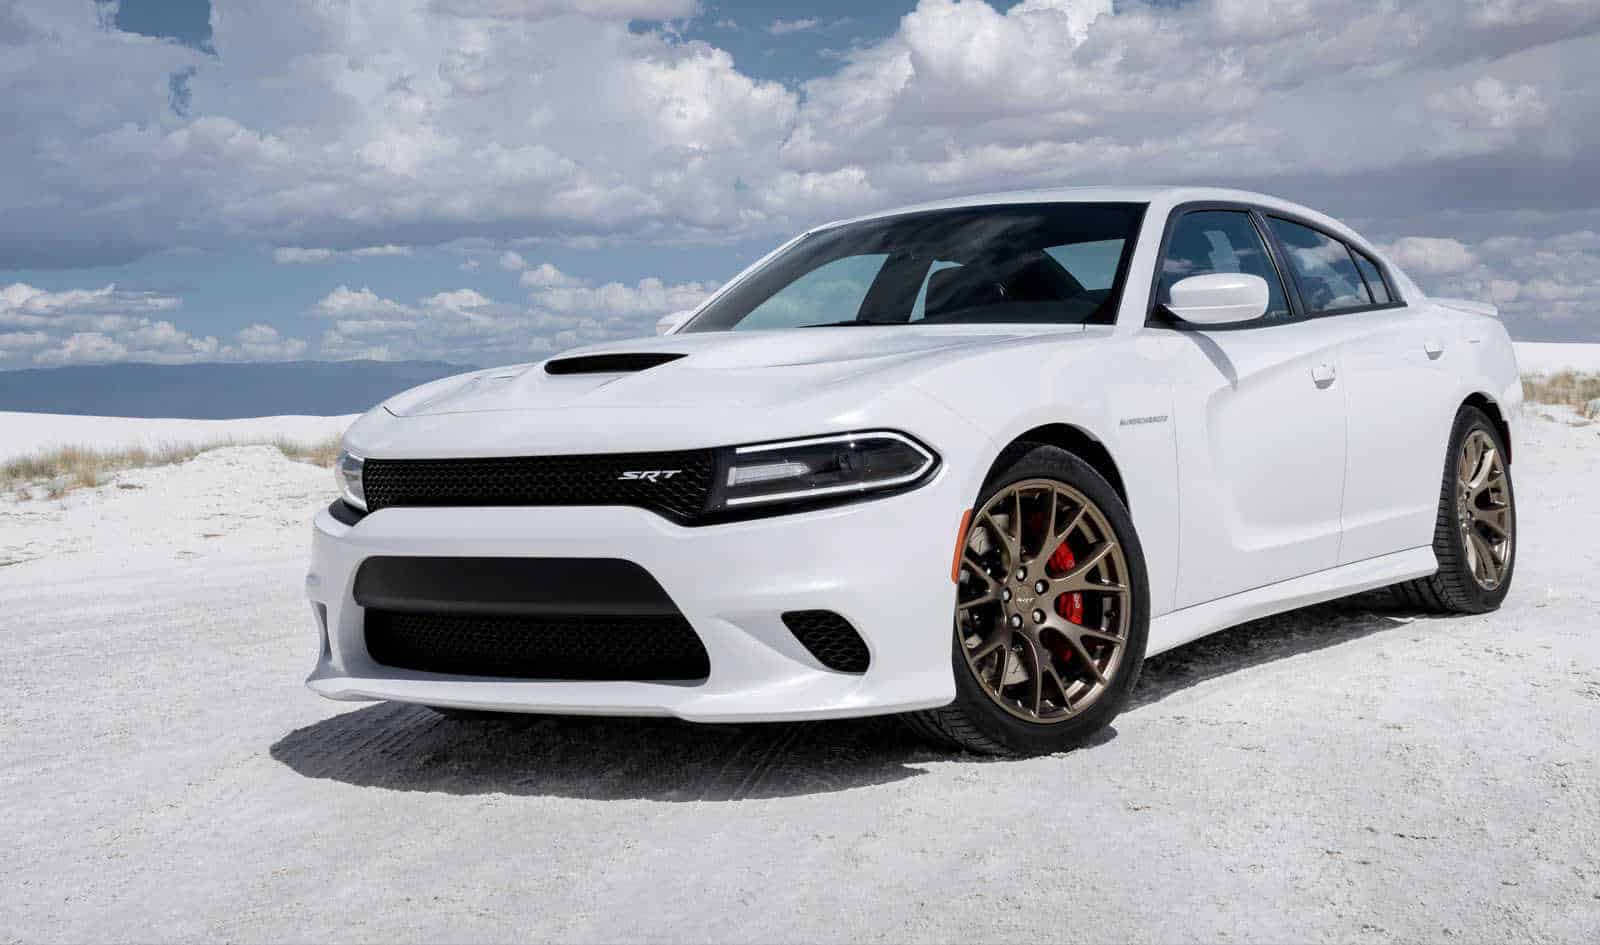 2017 Dodge Charger SRT Hellcat Review - Global Cars Brands